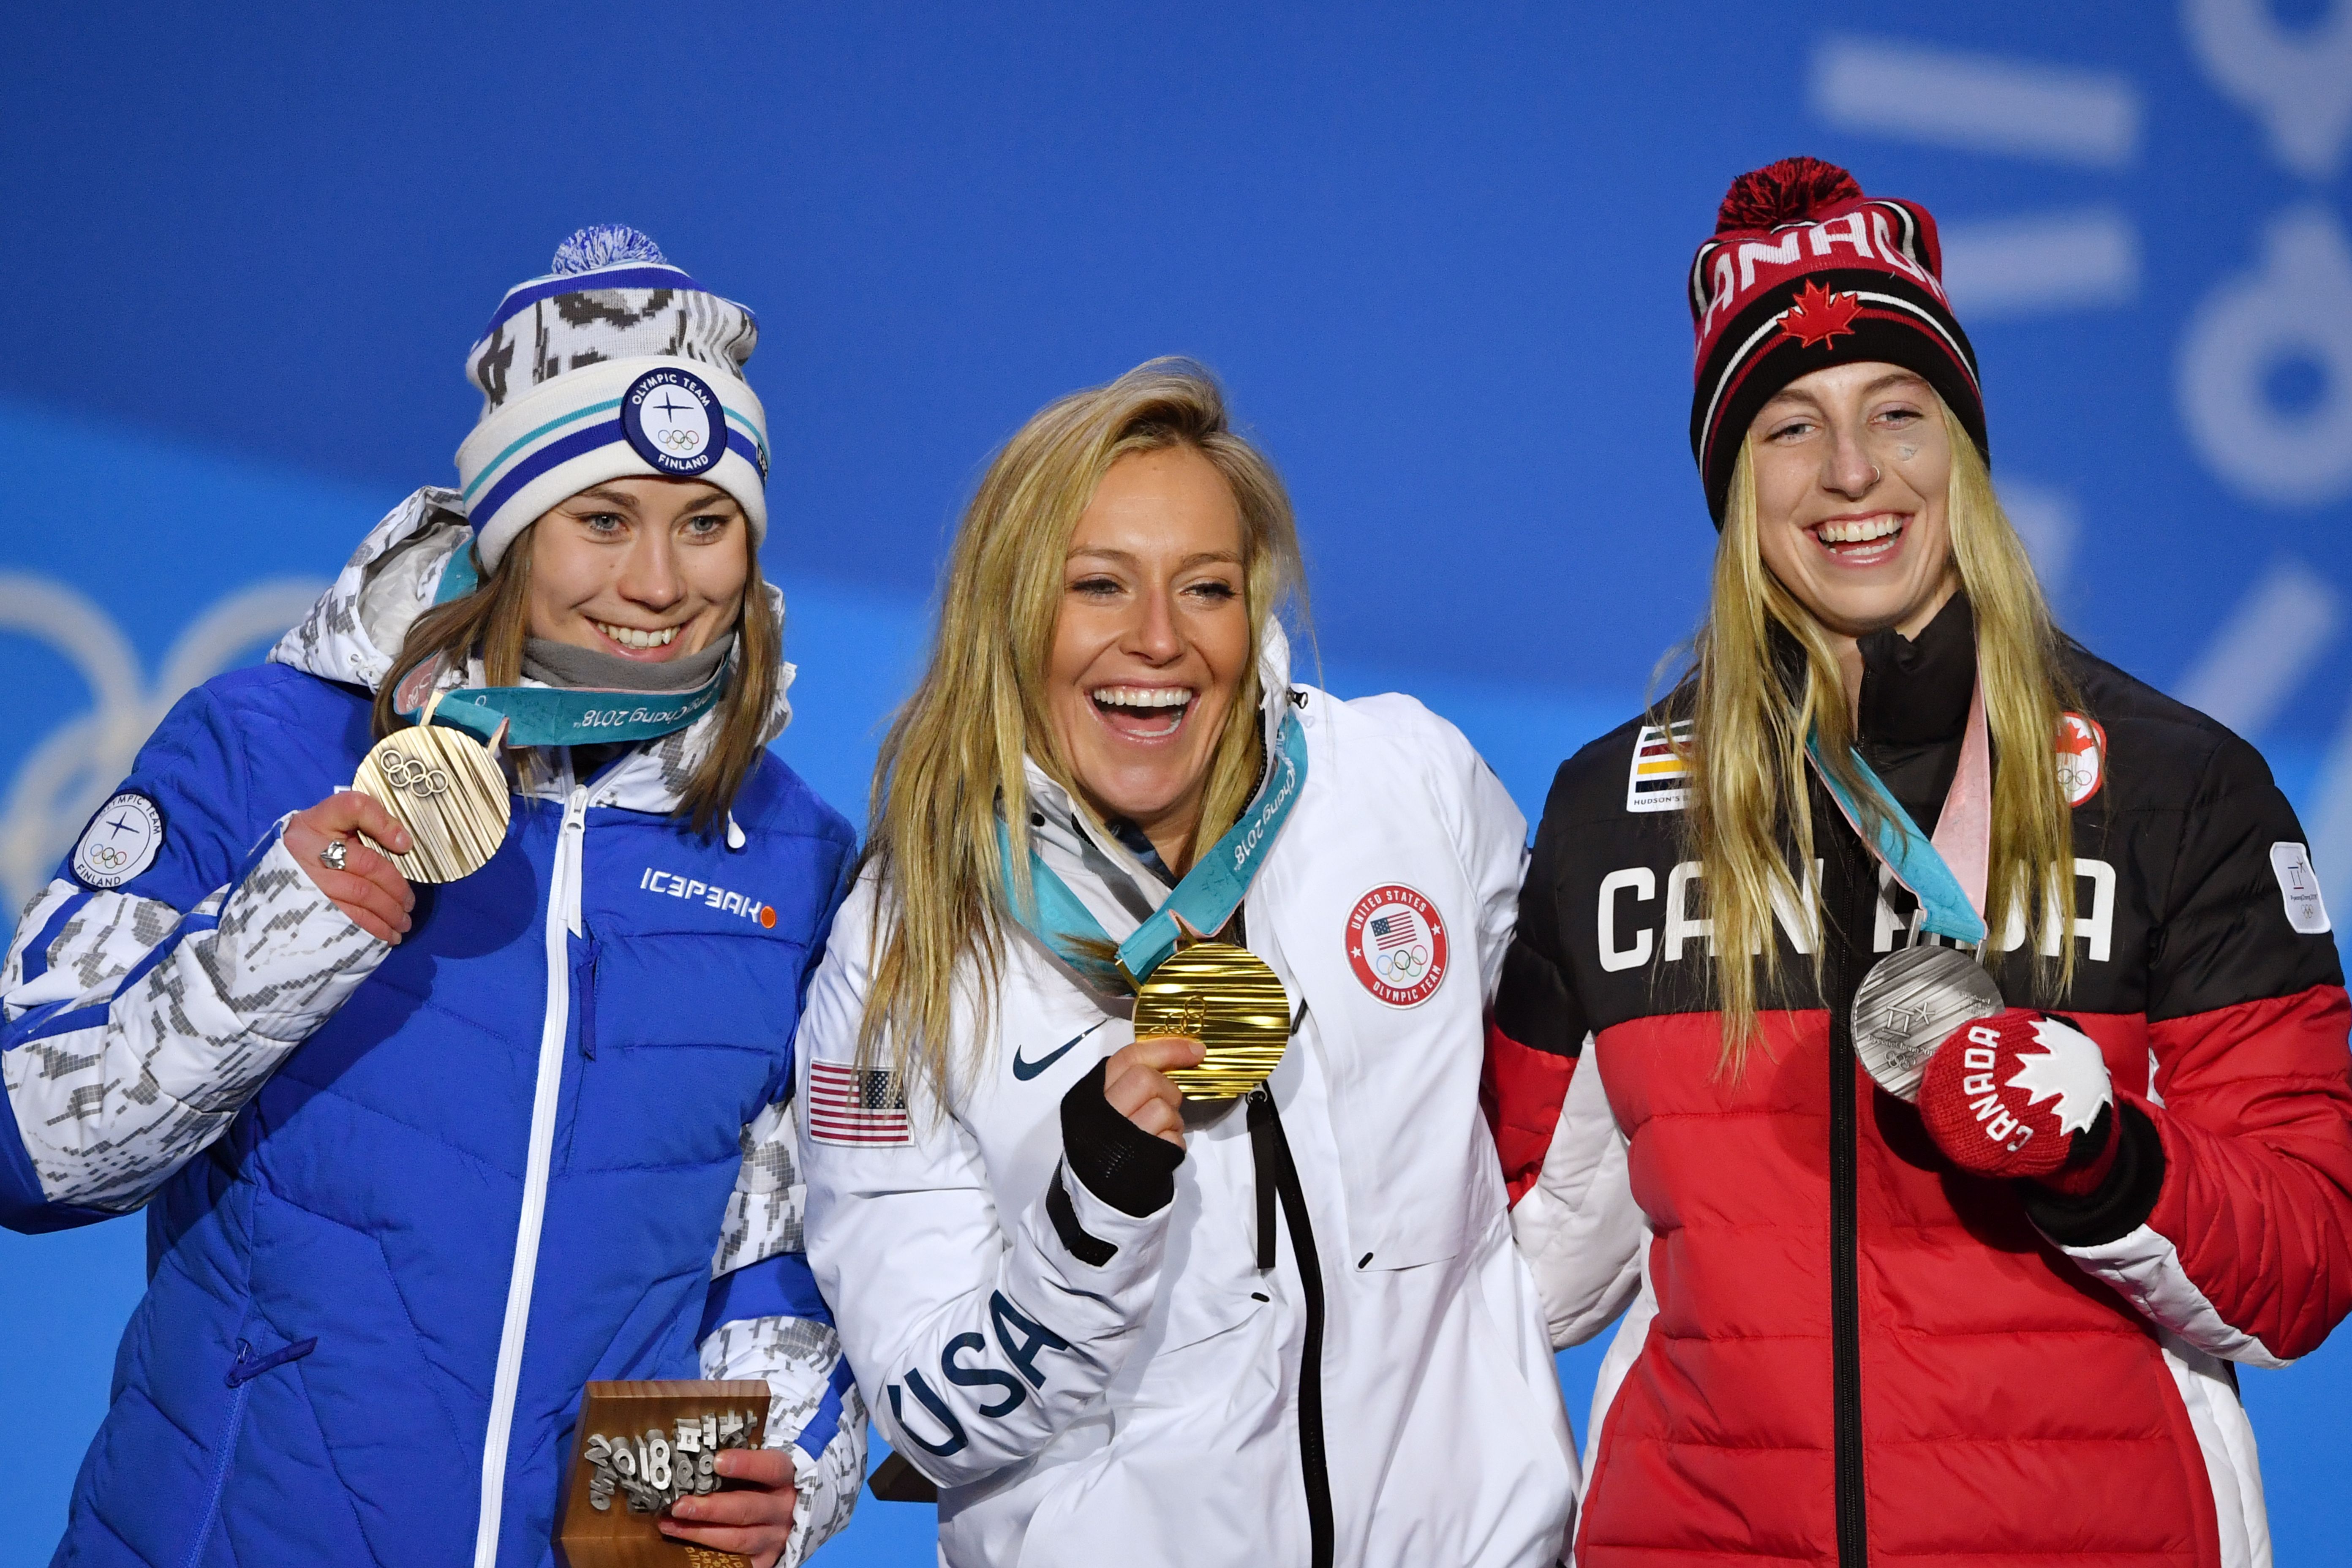 (L-R) Finland's bronze medallist Enni Rukajarvi, USA's gold medallist Jamie Anderson and Canada's silver medallist Laurie Blouin pose on the podium during the medal ceremony for the women's snowboard slopestyle at the Pyeongchang Medals Plaza during the Pyeongchang 2018 Winter Olympic Games in Pyeongchang on February 12, 2018. / AFP PHOTO / Fabrice COFFRINI        (Photo credit should read FABRICE COFFRINI/AFP/Getty Images)